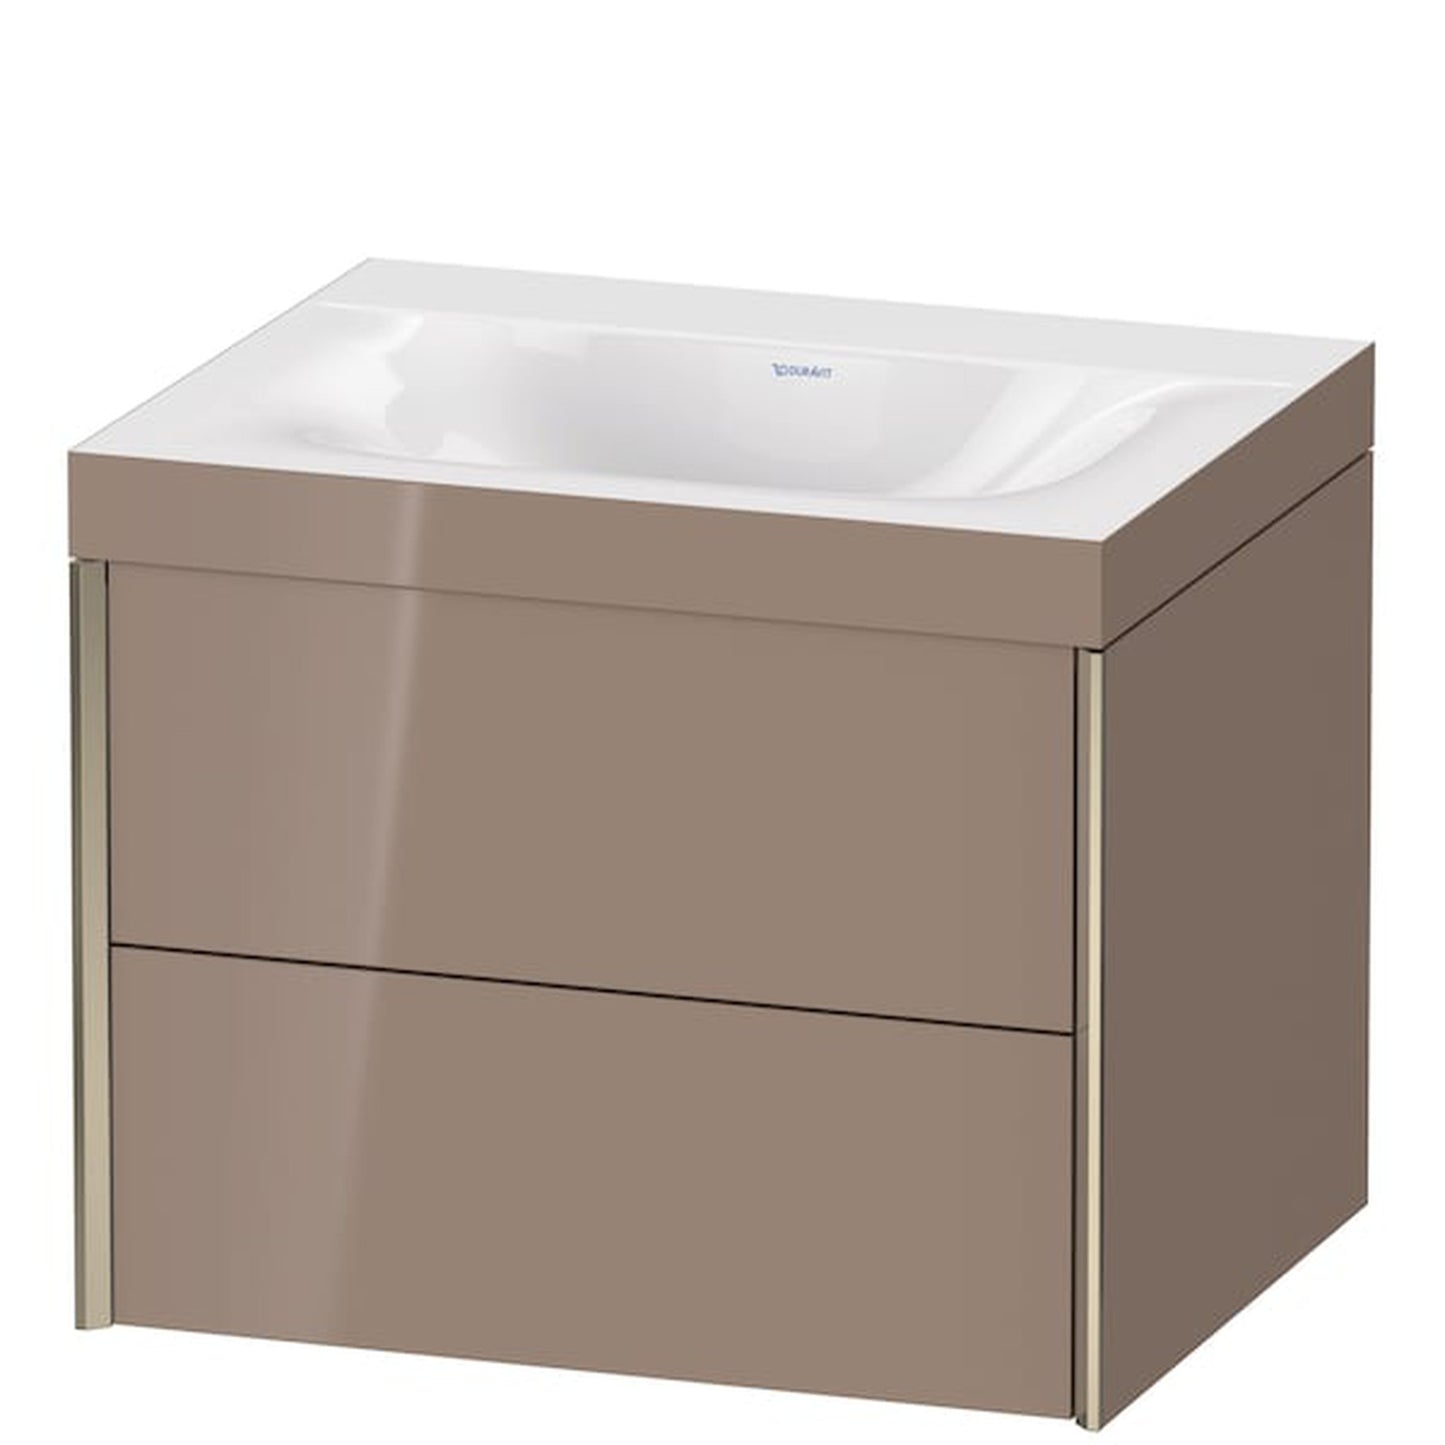 Duravit Xviu 24" x 20" x 19" Two Drawer C-Bonded Wall-Mount Vanity Kit Without Tap Hole, Cappuccino (XV4614NB186C)